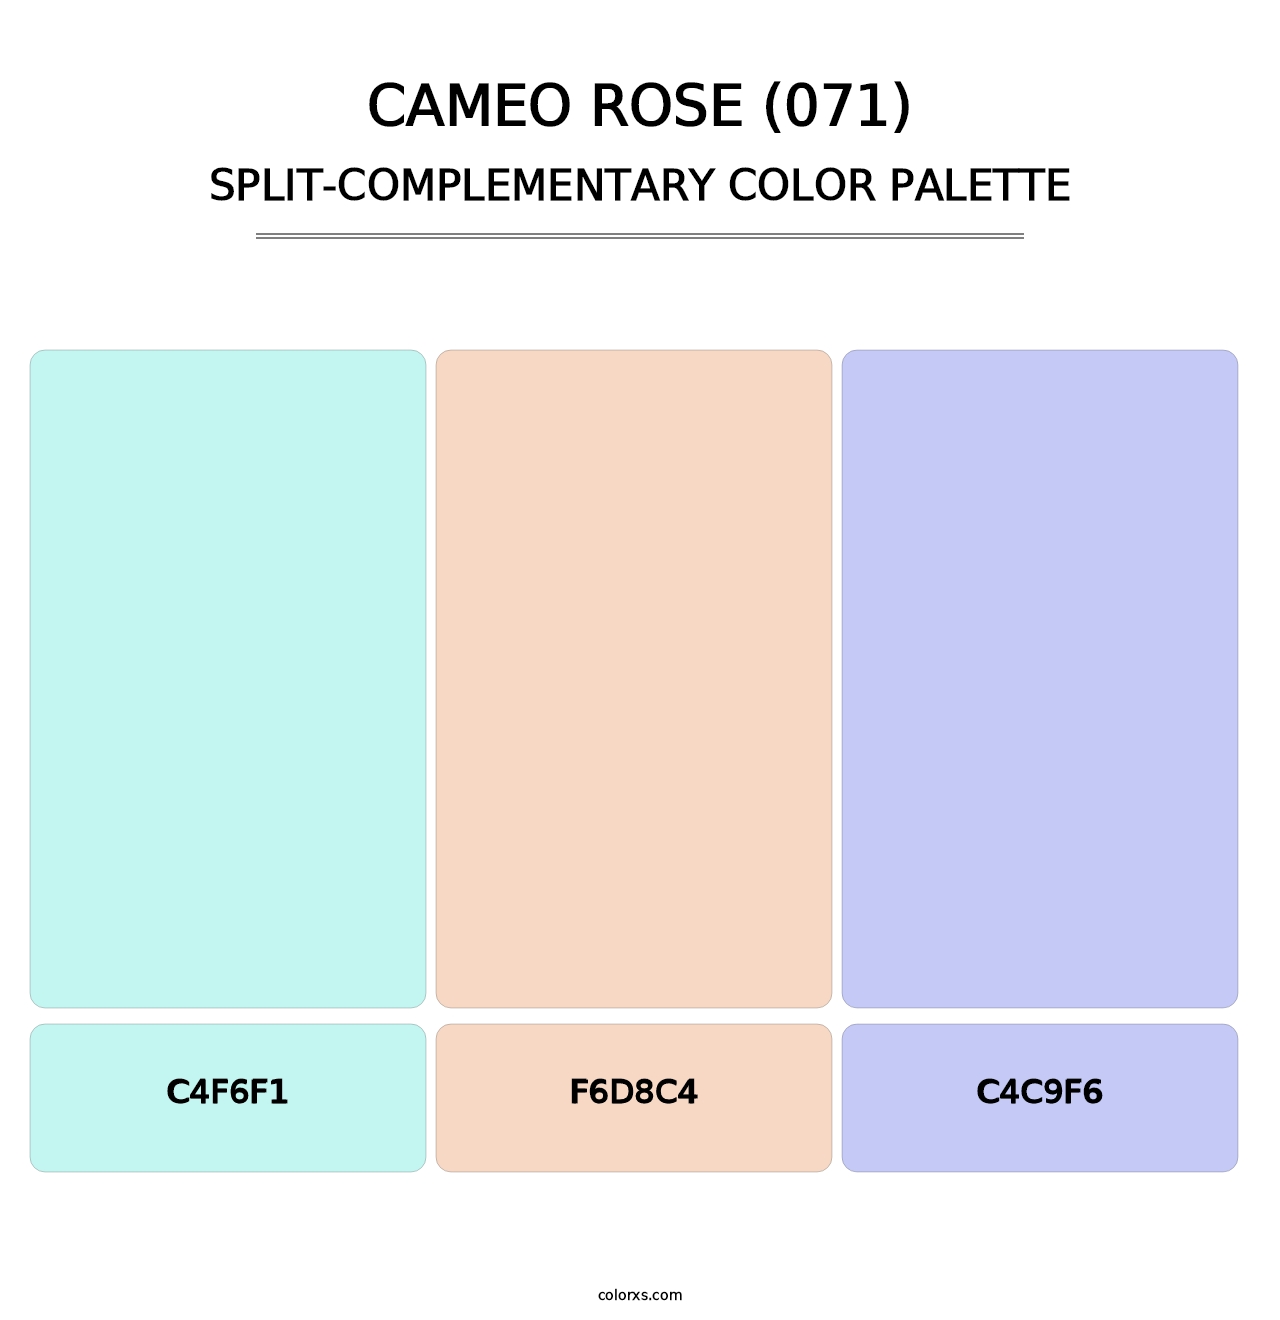 Cameo Rose (071) - Split-Complementary Color Palette